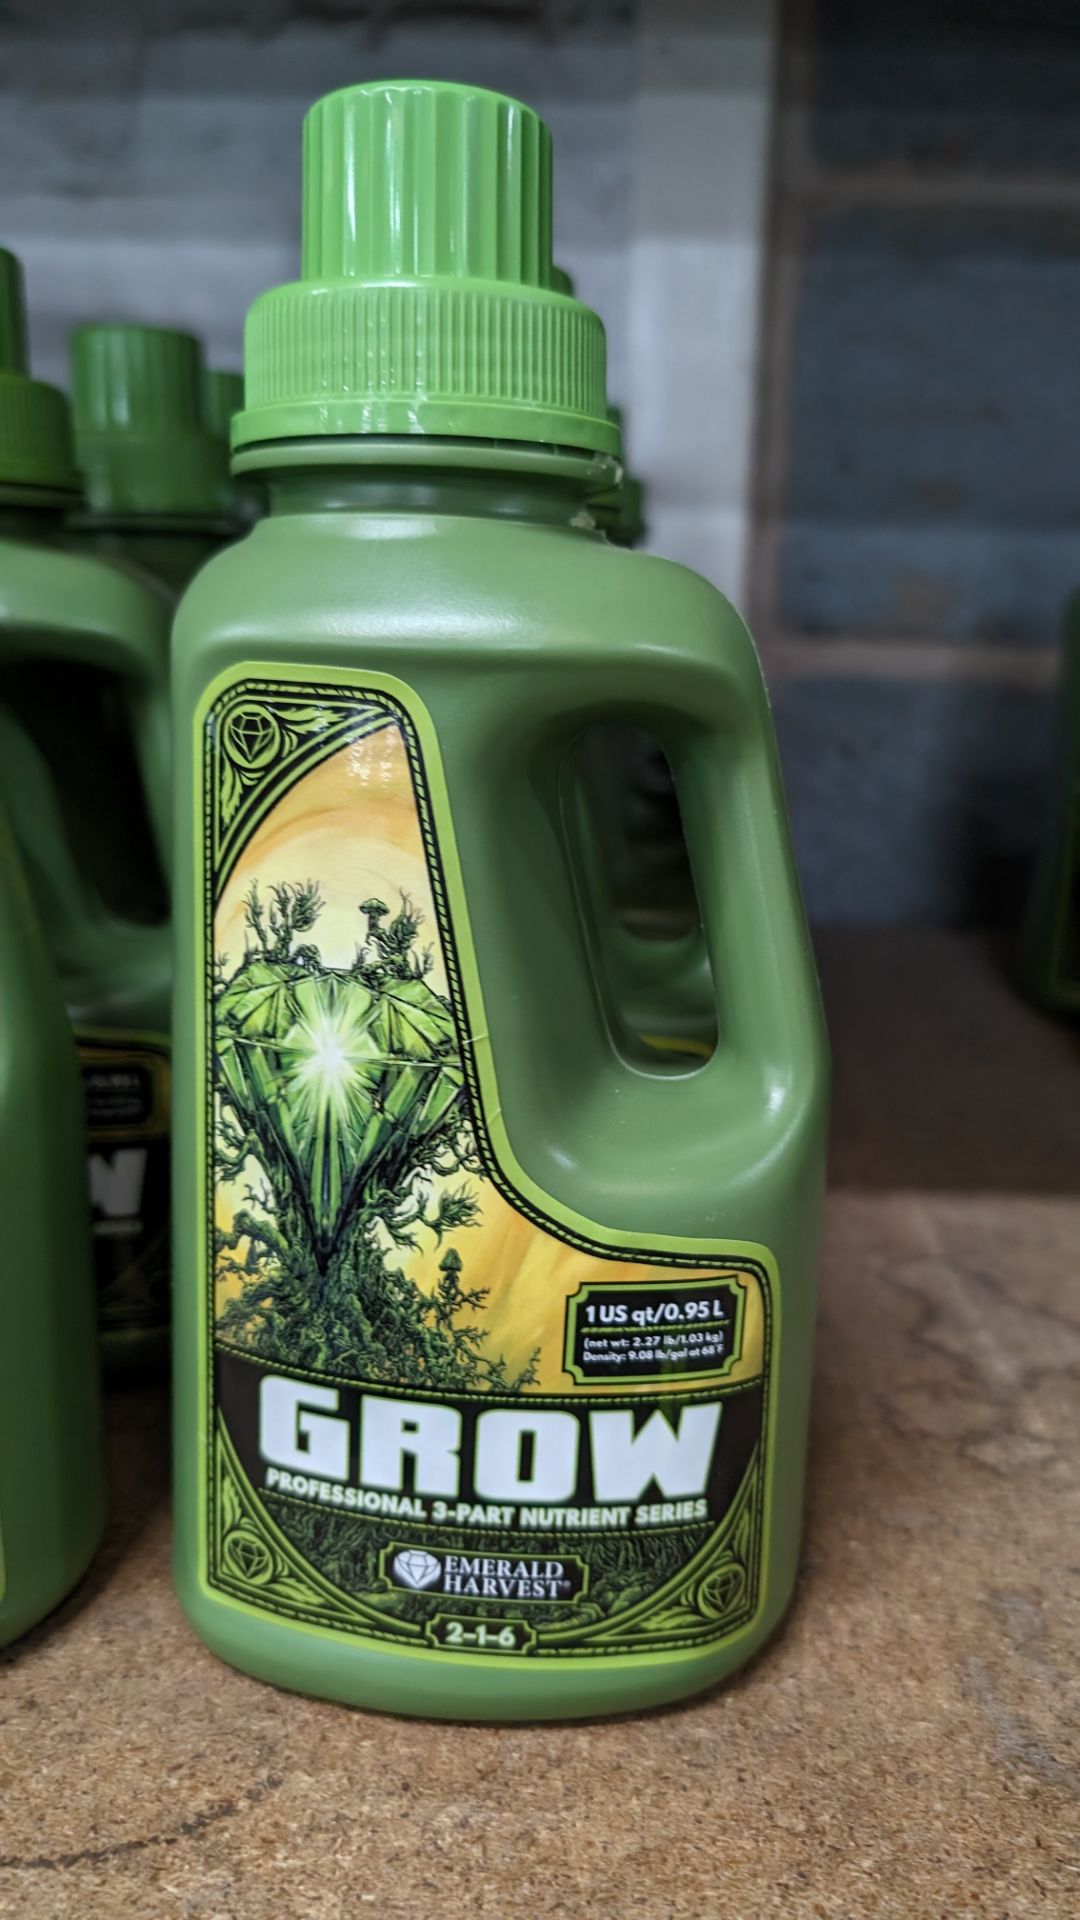 12 off 950ml bottles of Emerald Harvest Grow 2-1-6 Professional 3 Part Nutrient Series - Image 3 of 3